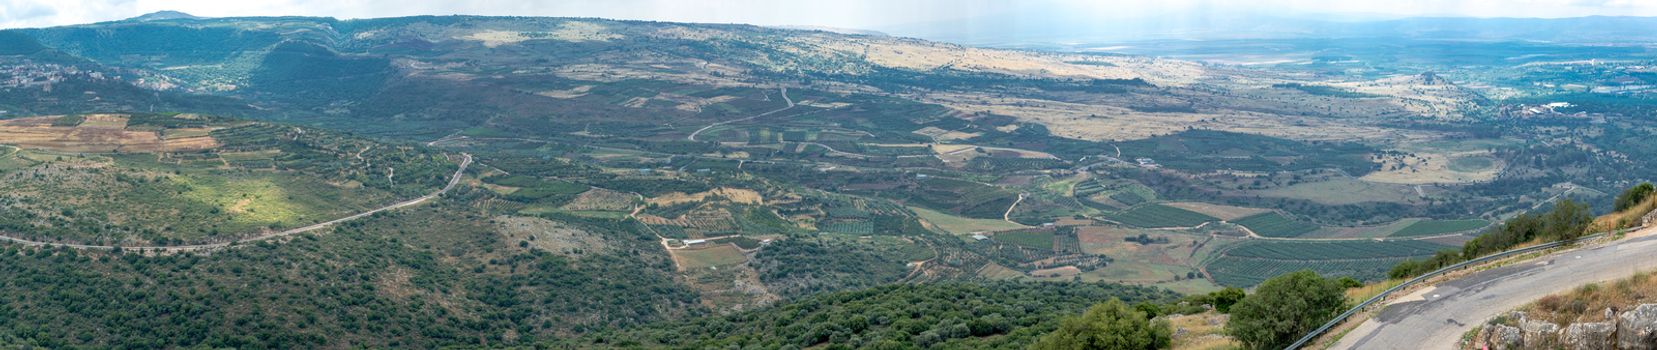 Panoramic view of the north section of the Hula Valley, viewed from Nimrod Fortress. Northern Israel